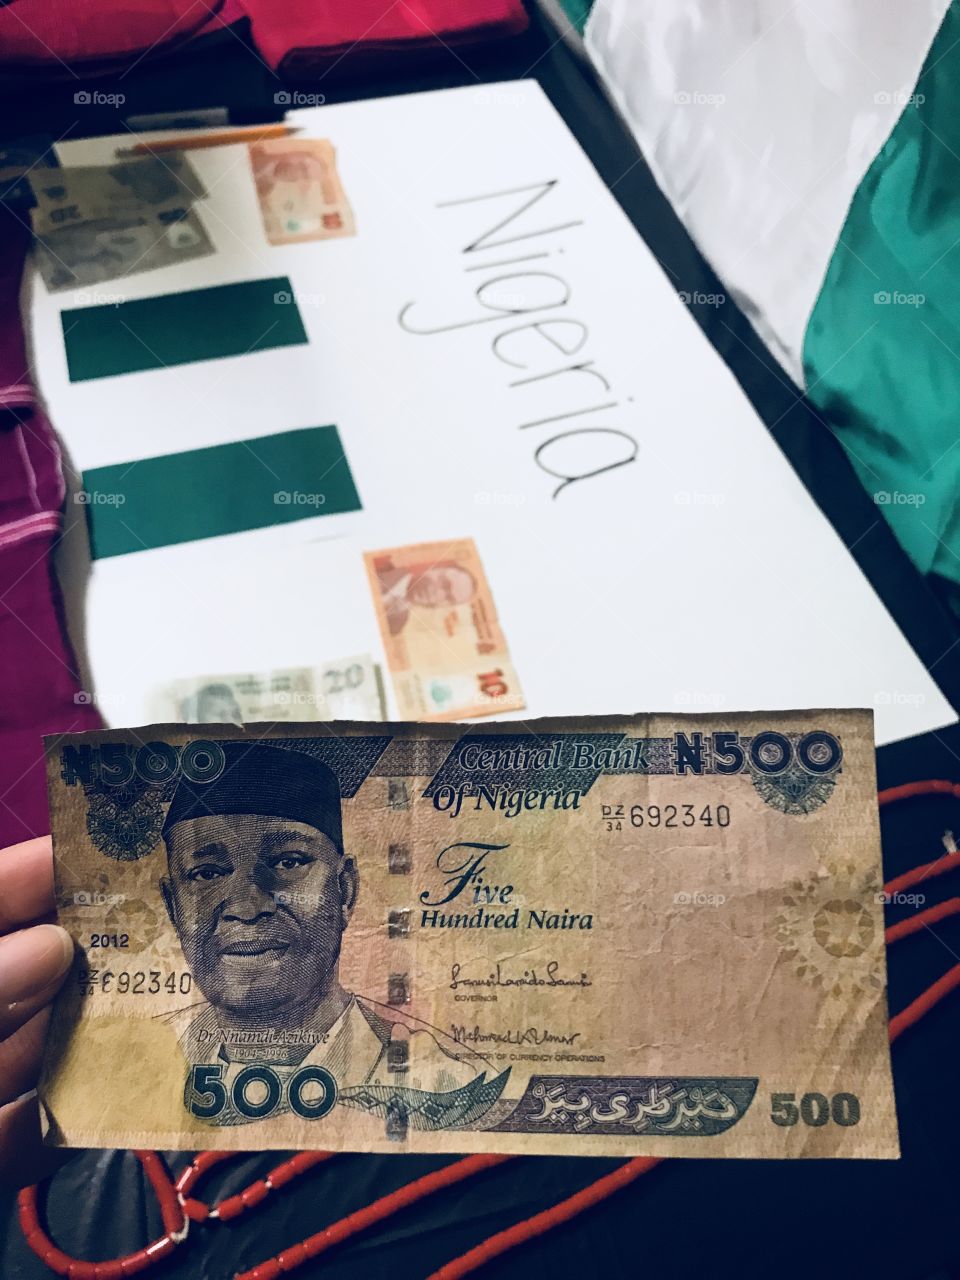 Naira. Currency of Nigeria. Nigeria is a West African nation of over 100 million energetic people. 